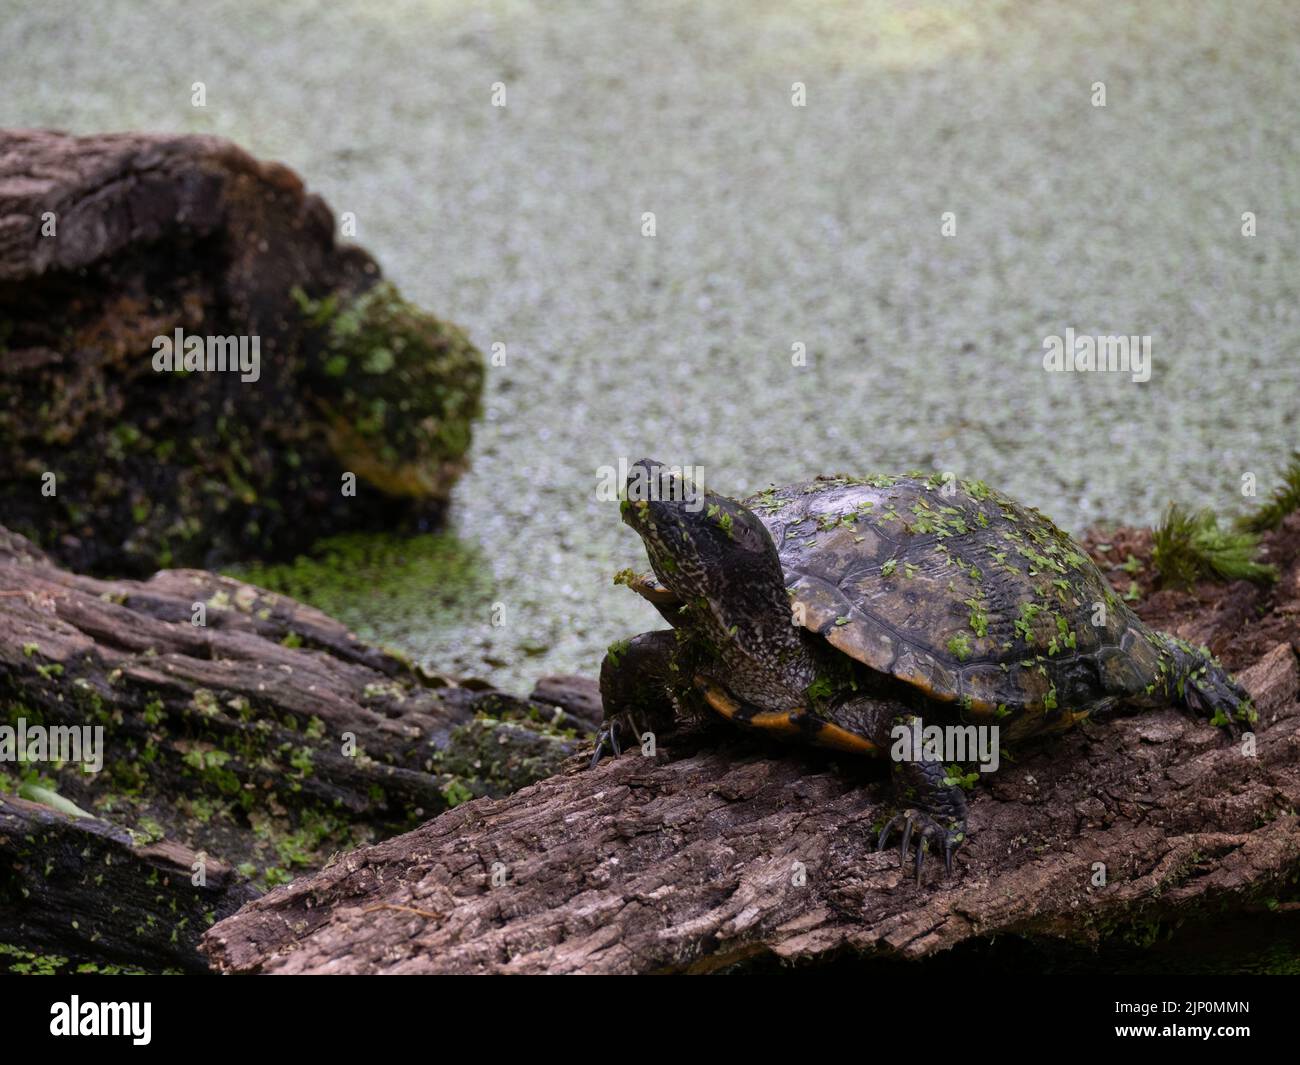 Pond Slider turtle on a log in Texas. Turtle has small leaves on its head and shell. Stock Photo